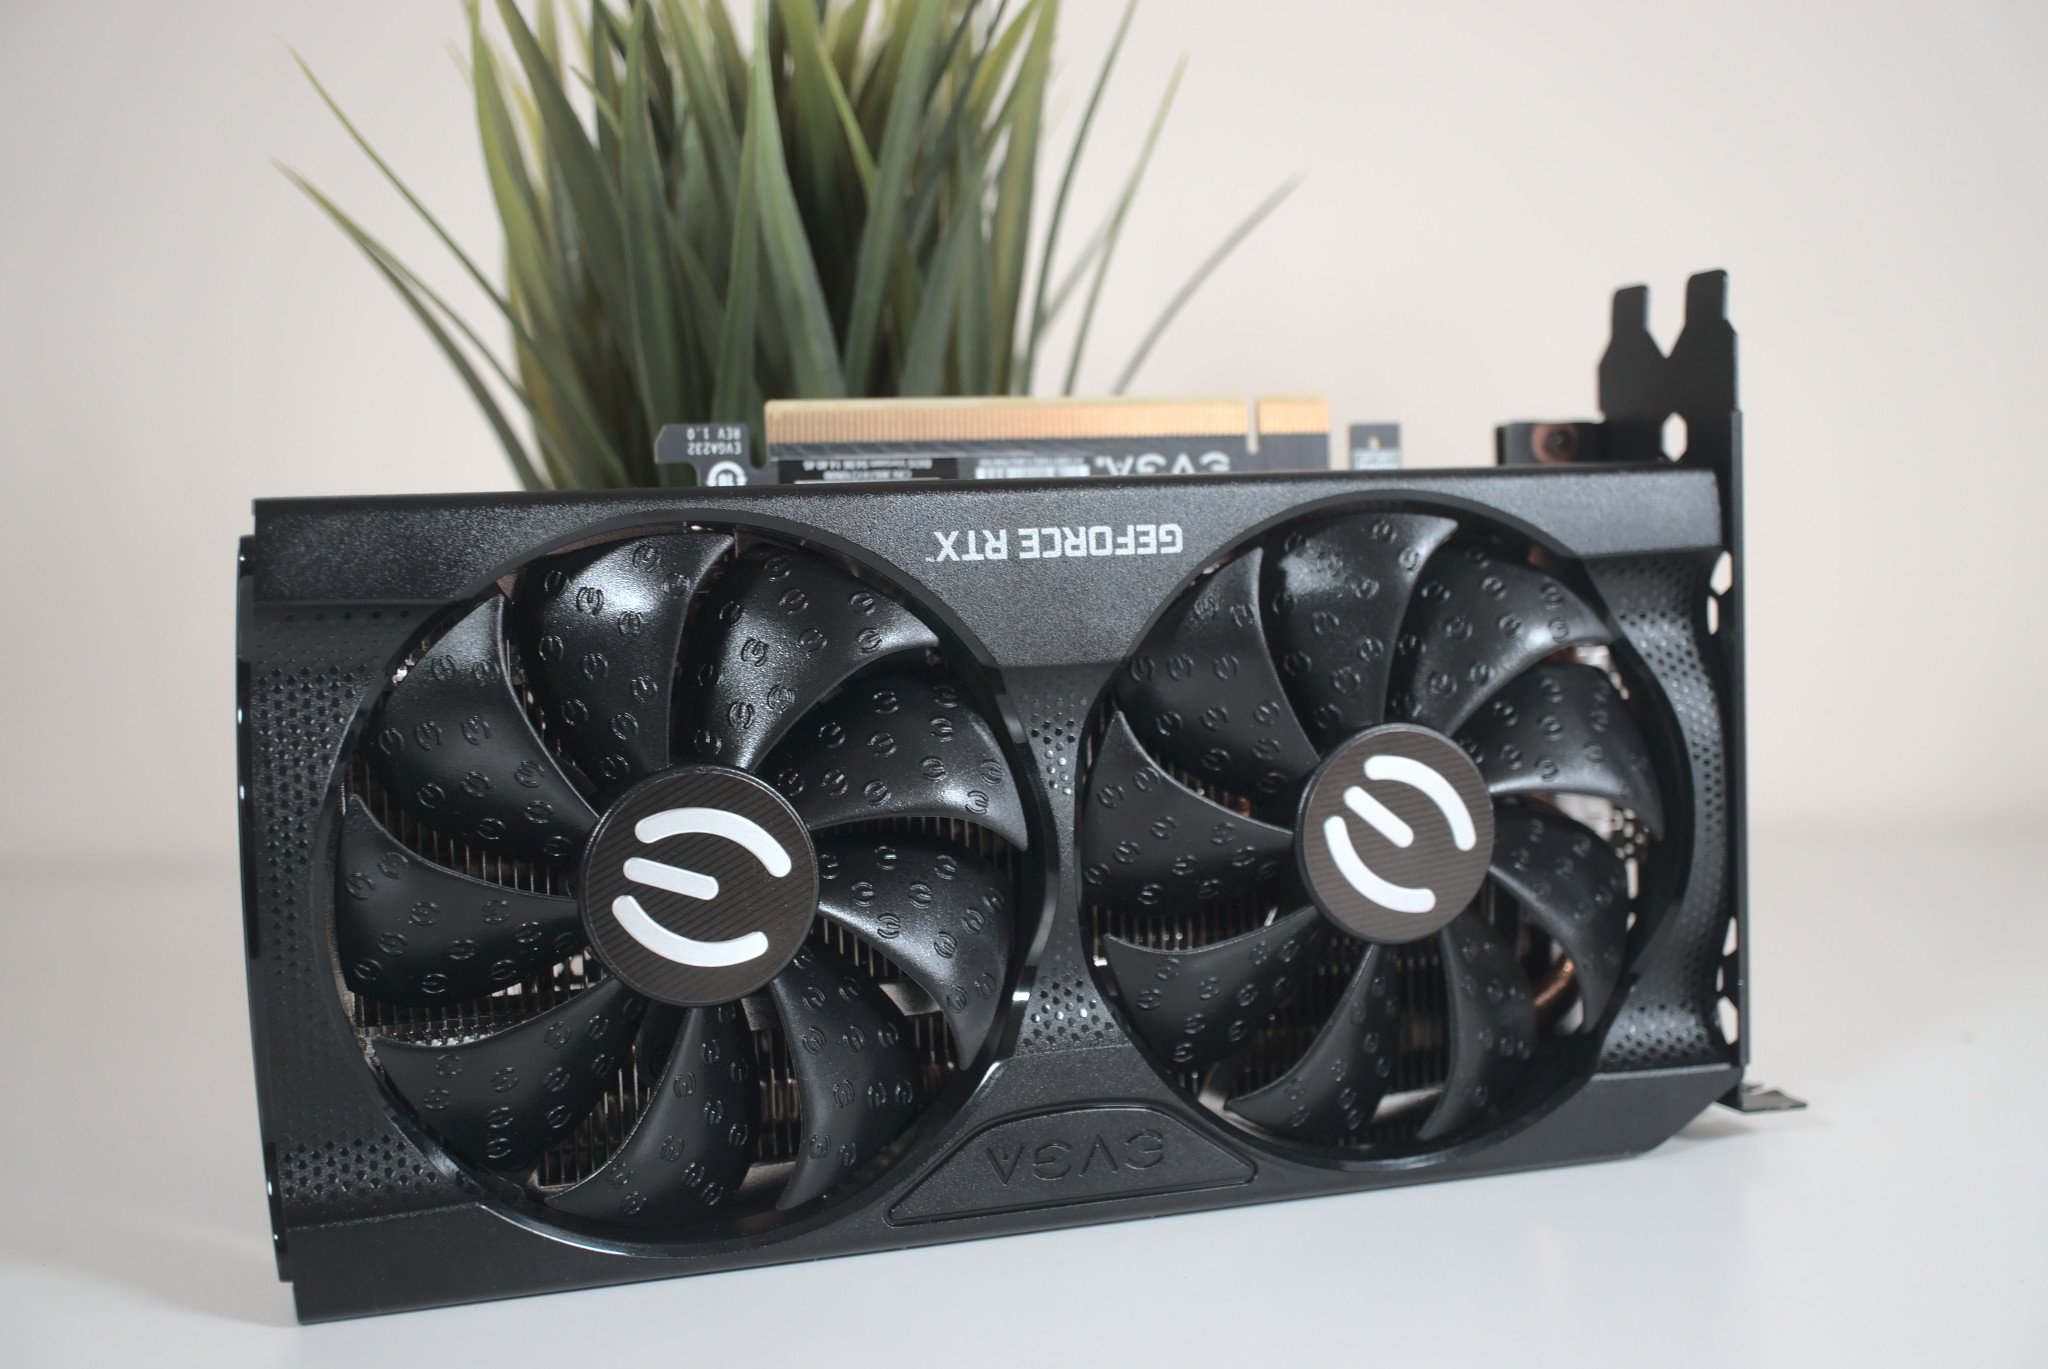 NVIDIA RTX 3060 Ti review: The new king of $399 GPUs